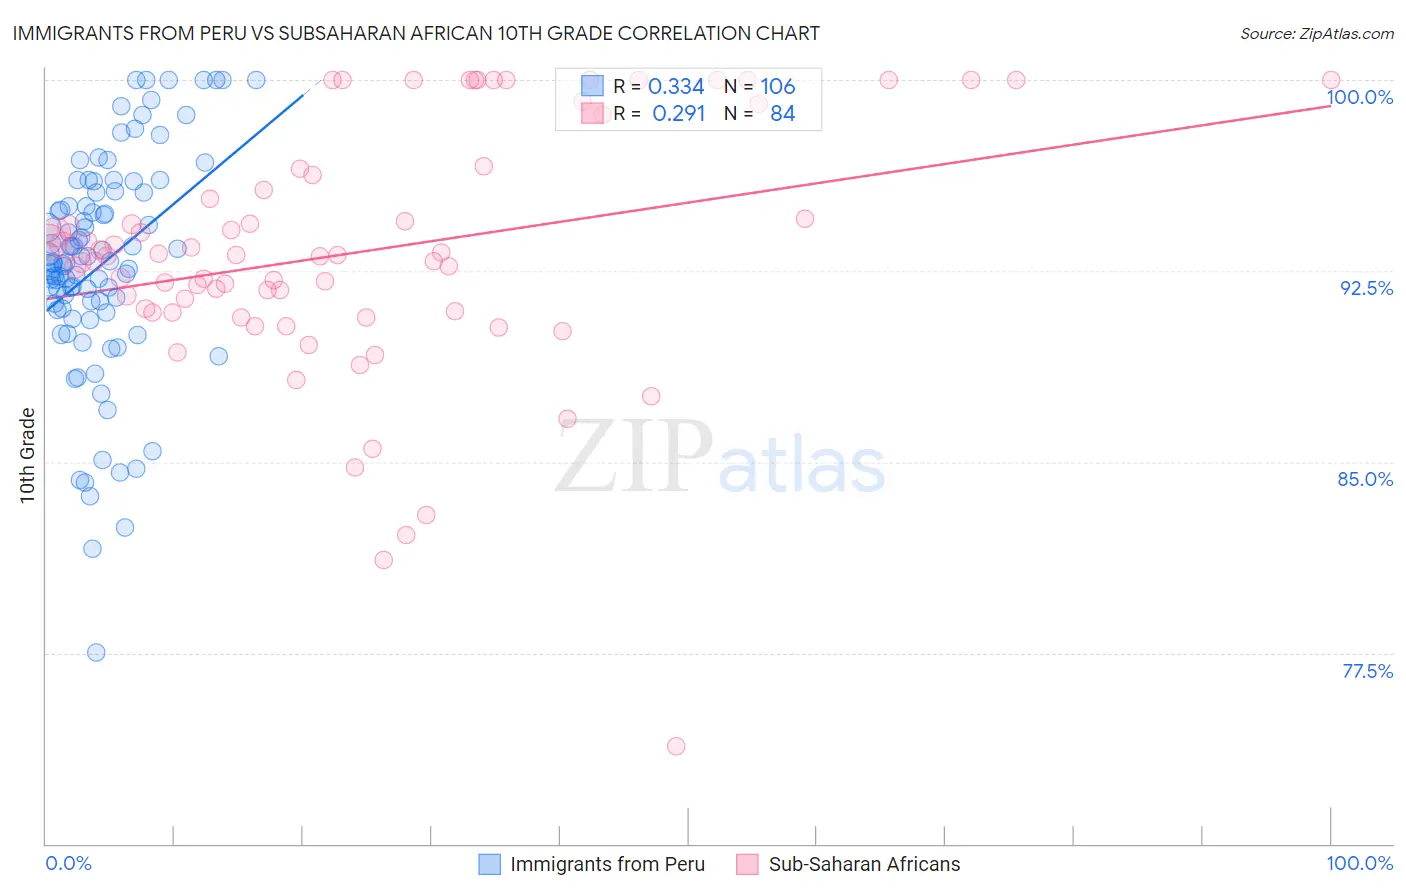 Immigrants from Peru vs Subsaharan African 10th Grade